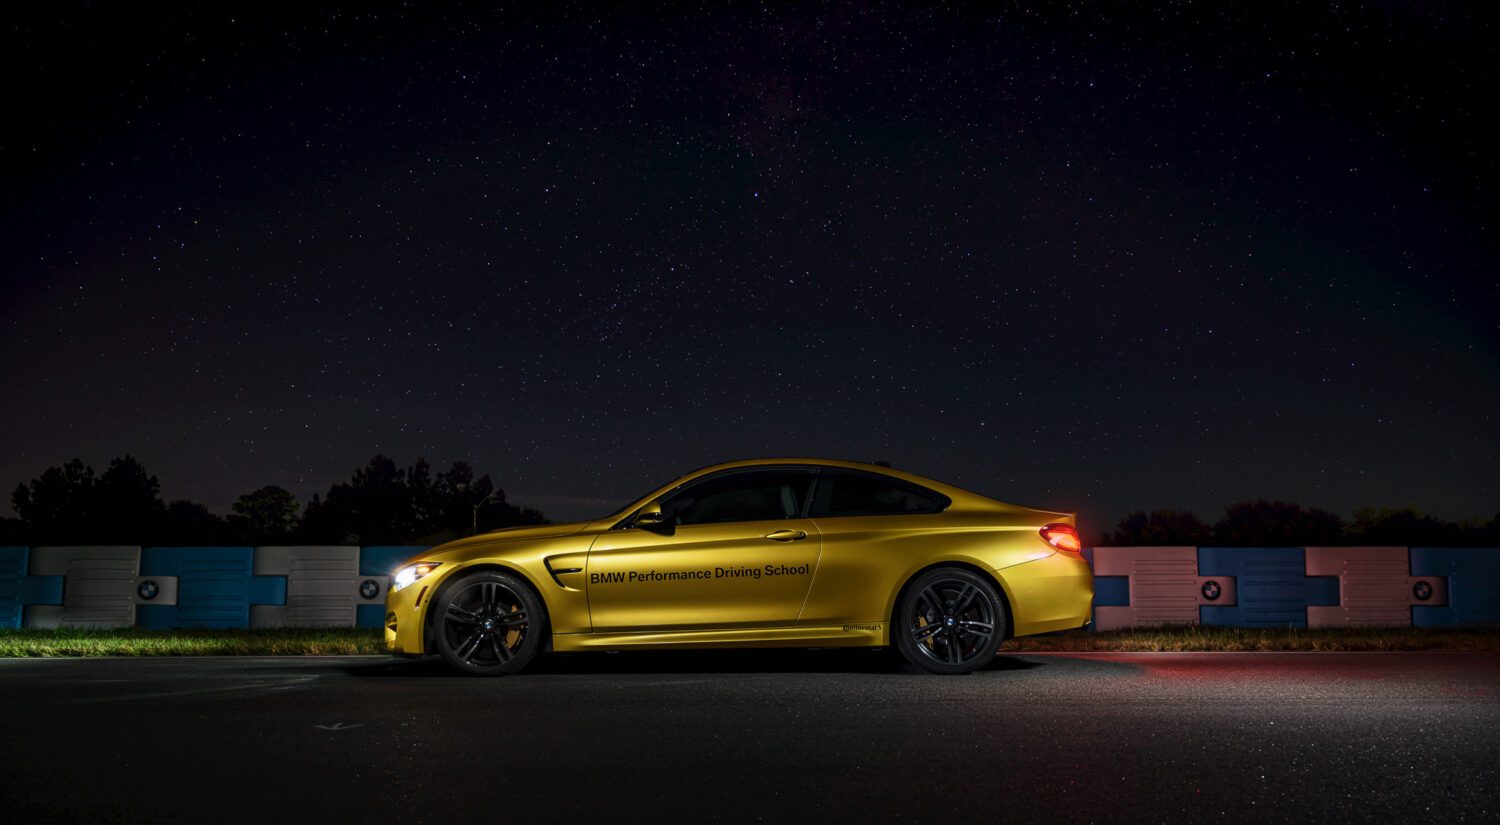 Cars and stars: How to shoot the night sky, Part 1